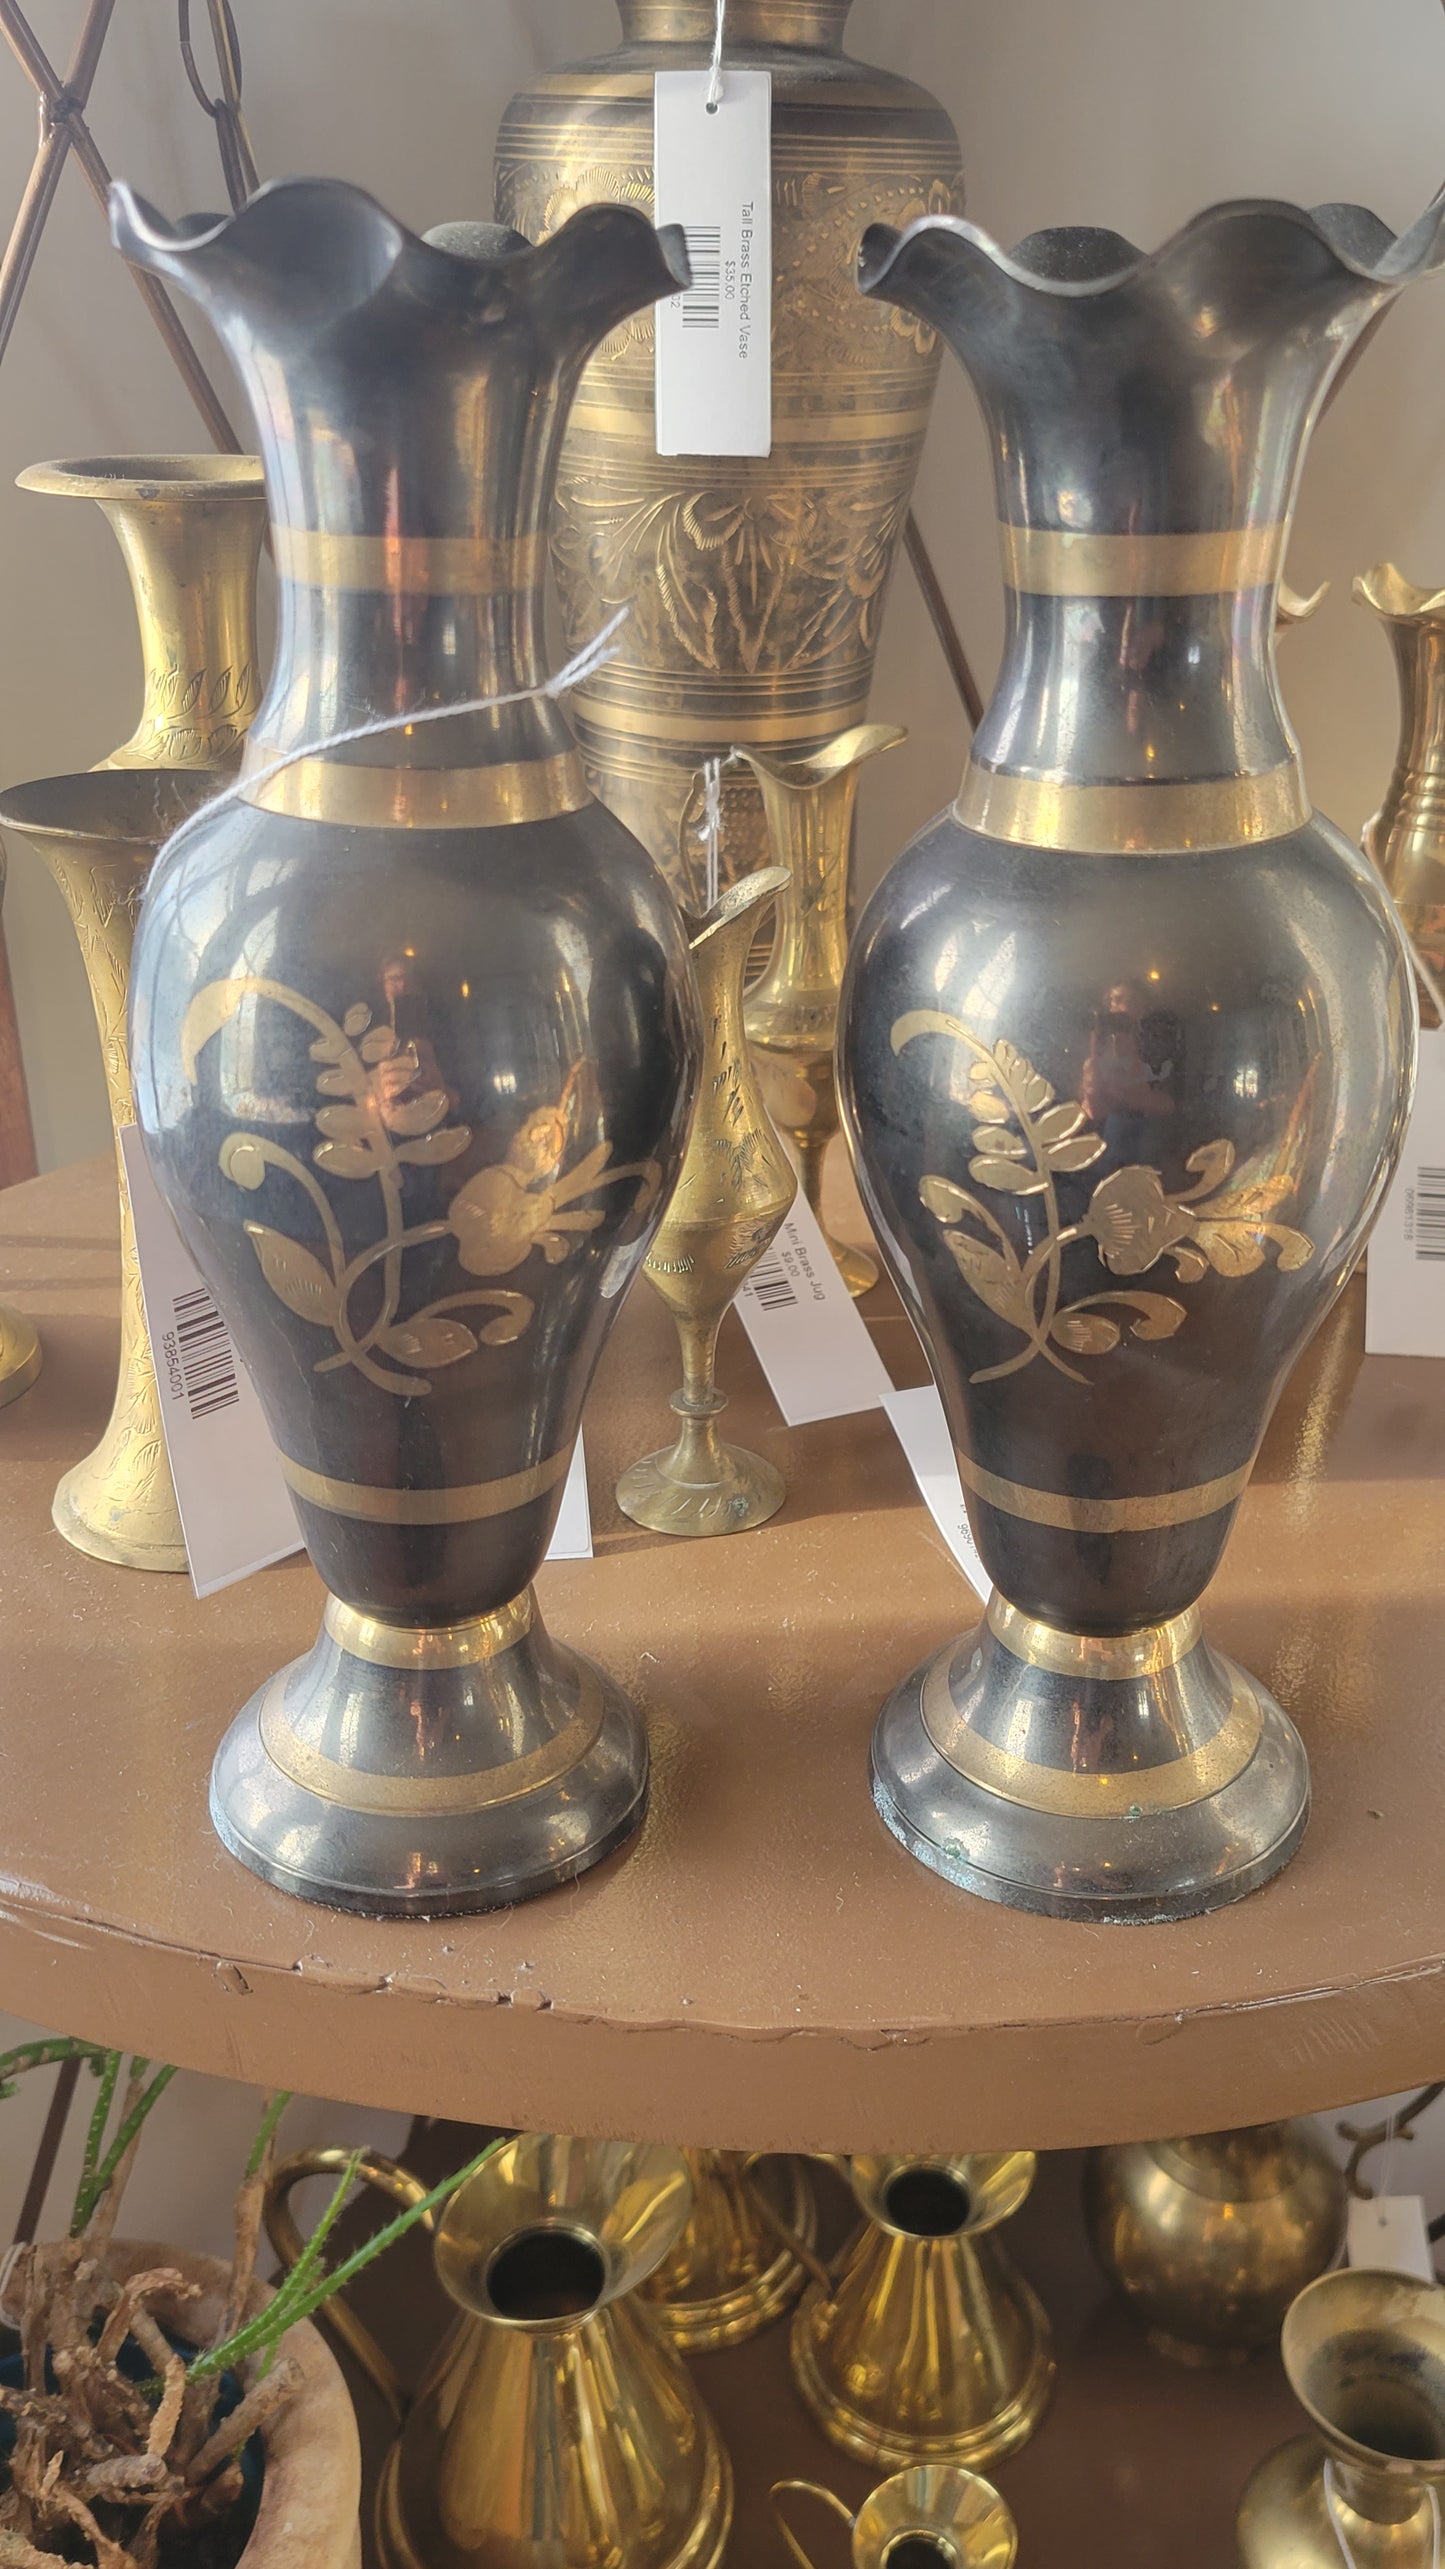 Matching Black and Brass Vases